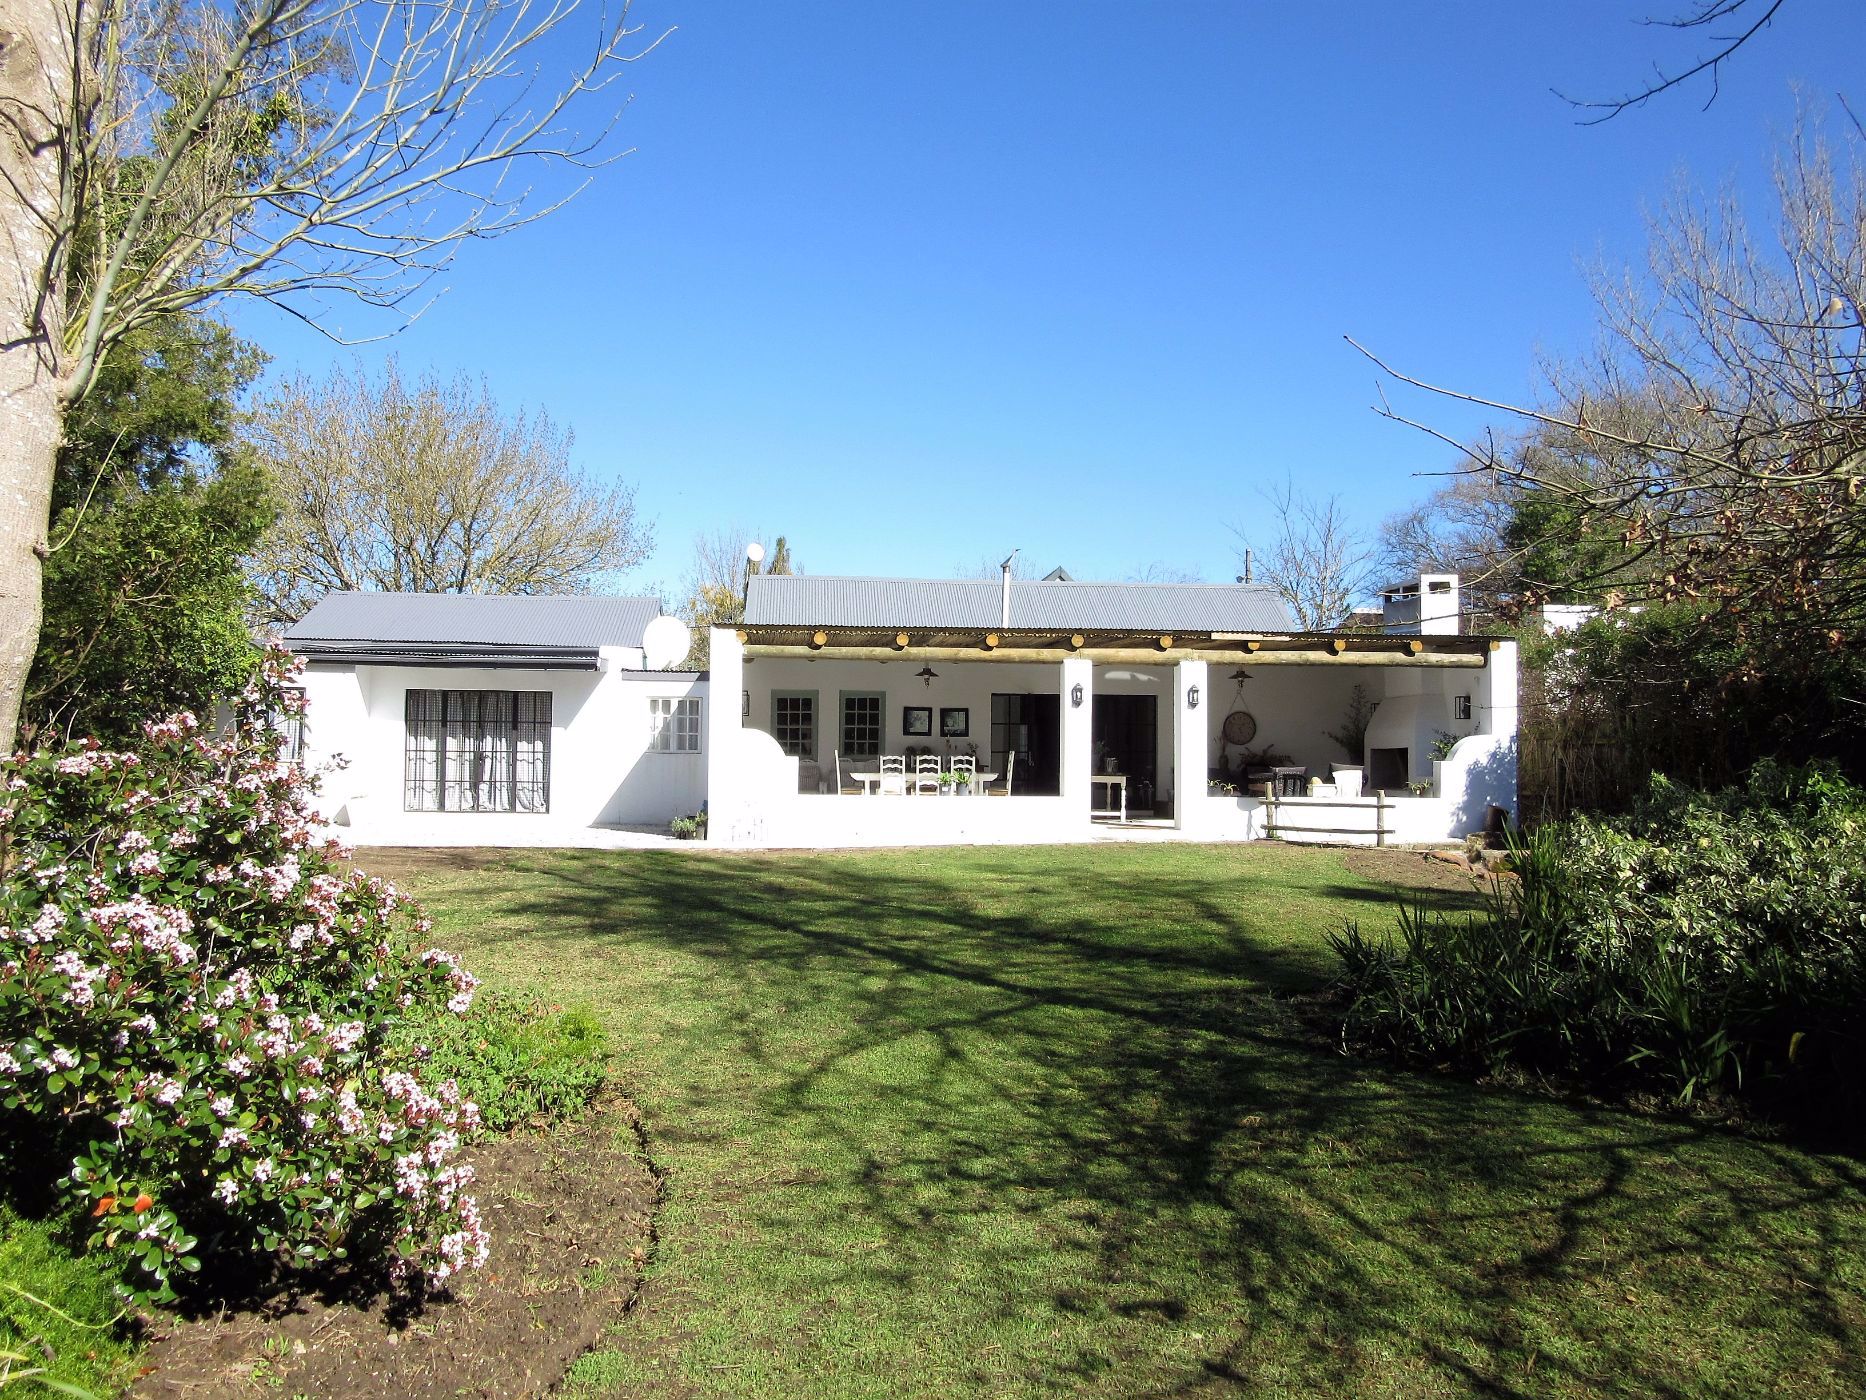 4 bedroom house for sale in Greyton